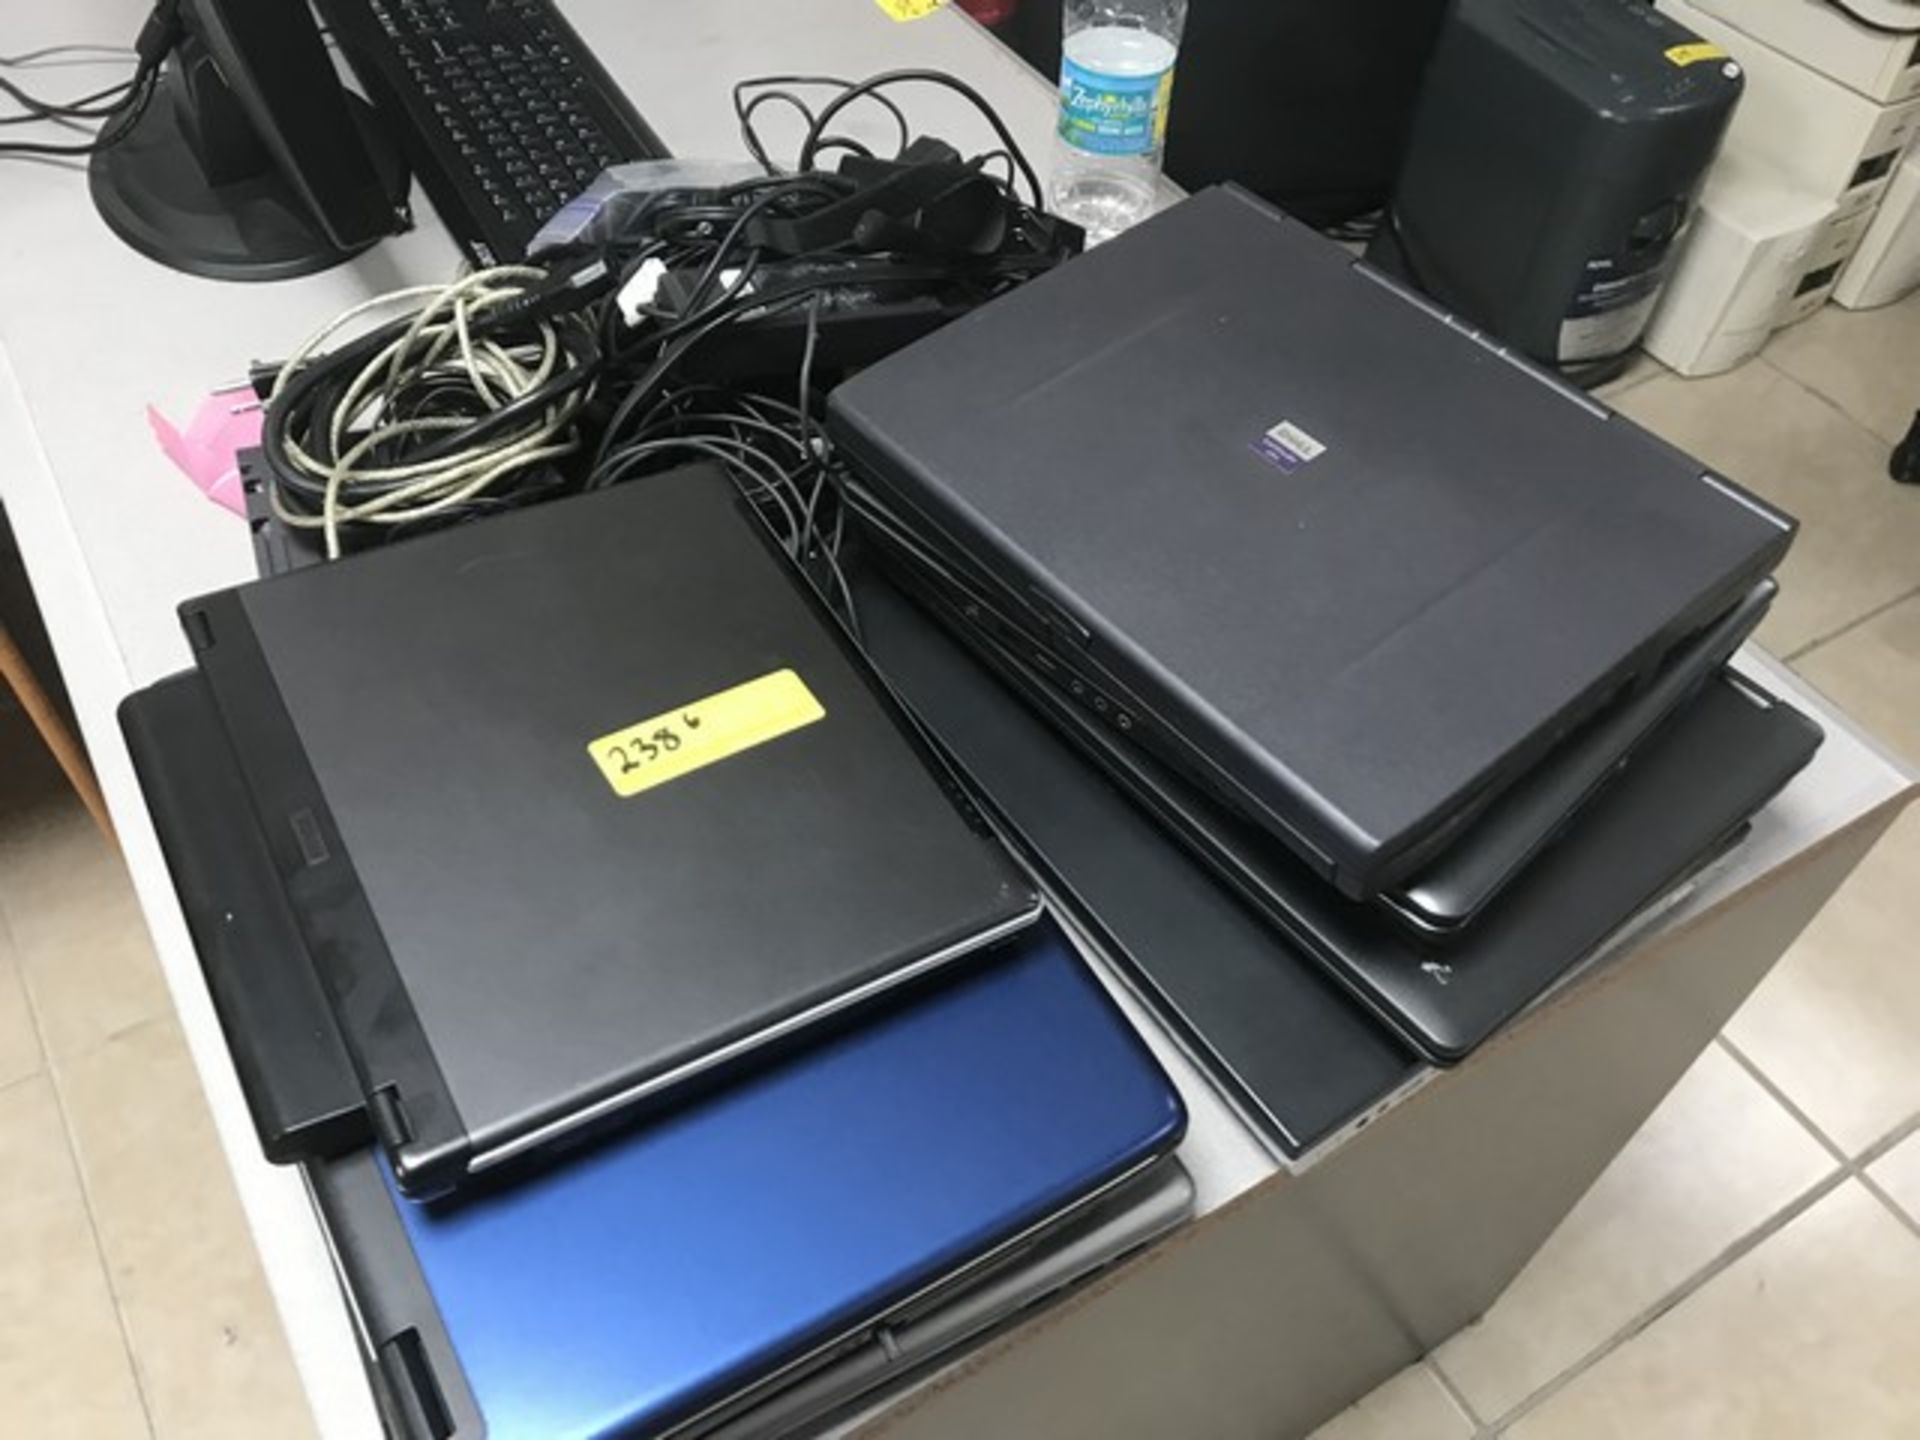 ASSORTED LAPTOPS WITH CHARGERS - TOSHIBA / DELL / ACER / SONY